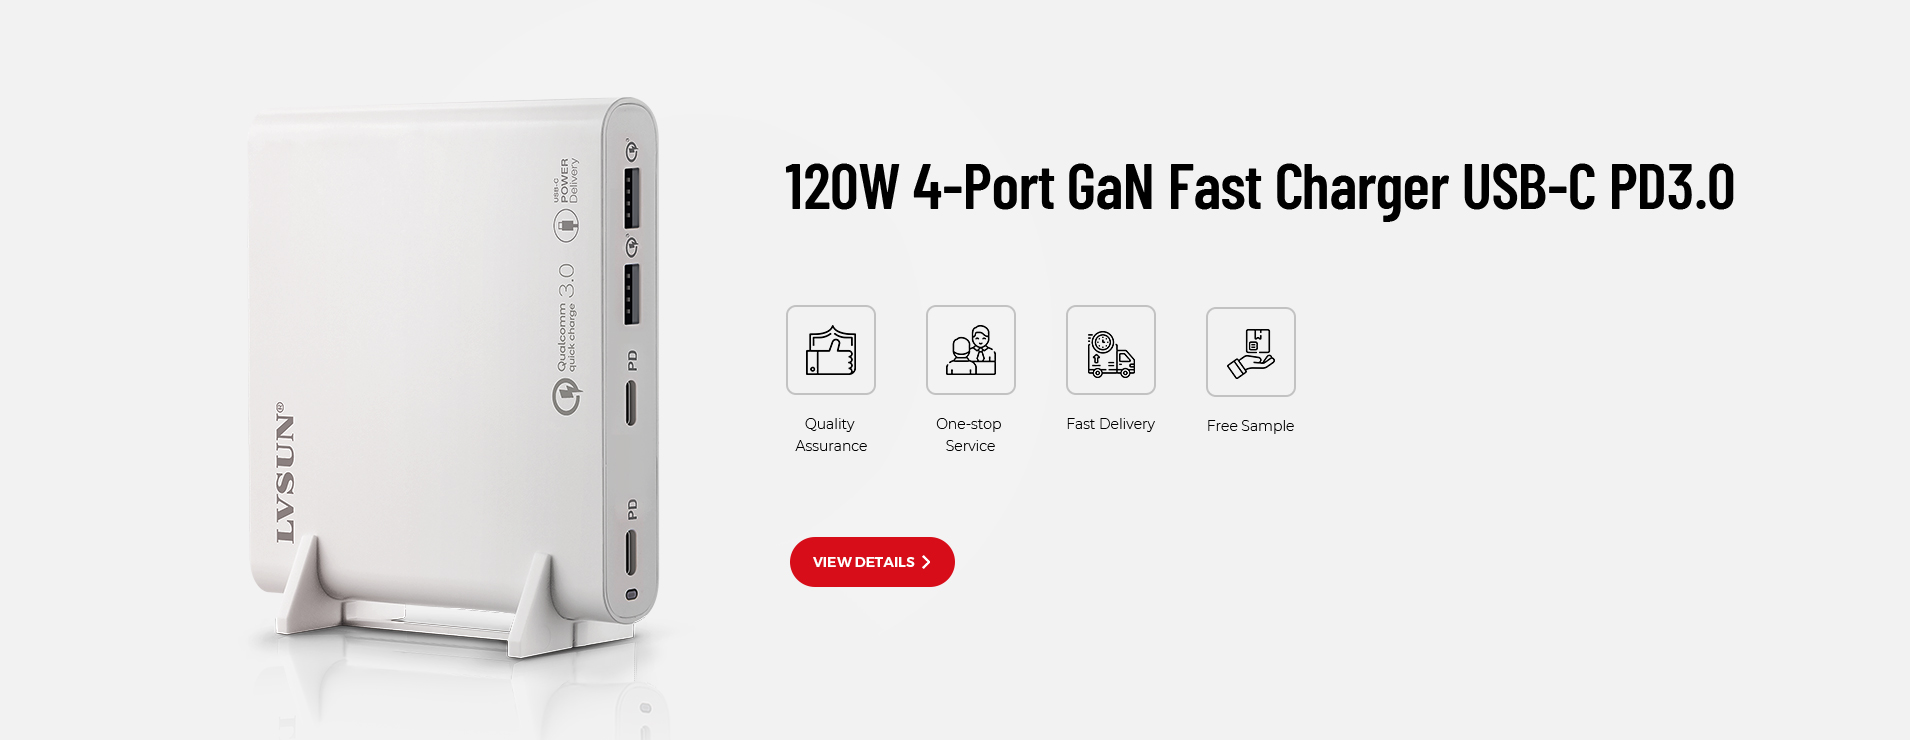 4-Port GaN Fast Charger